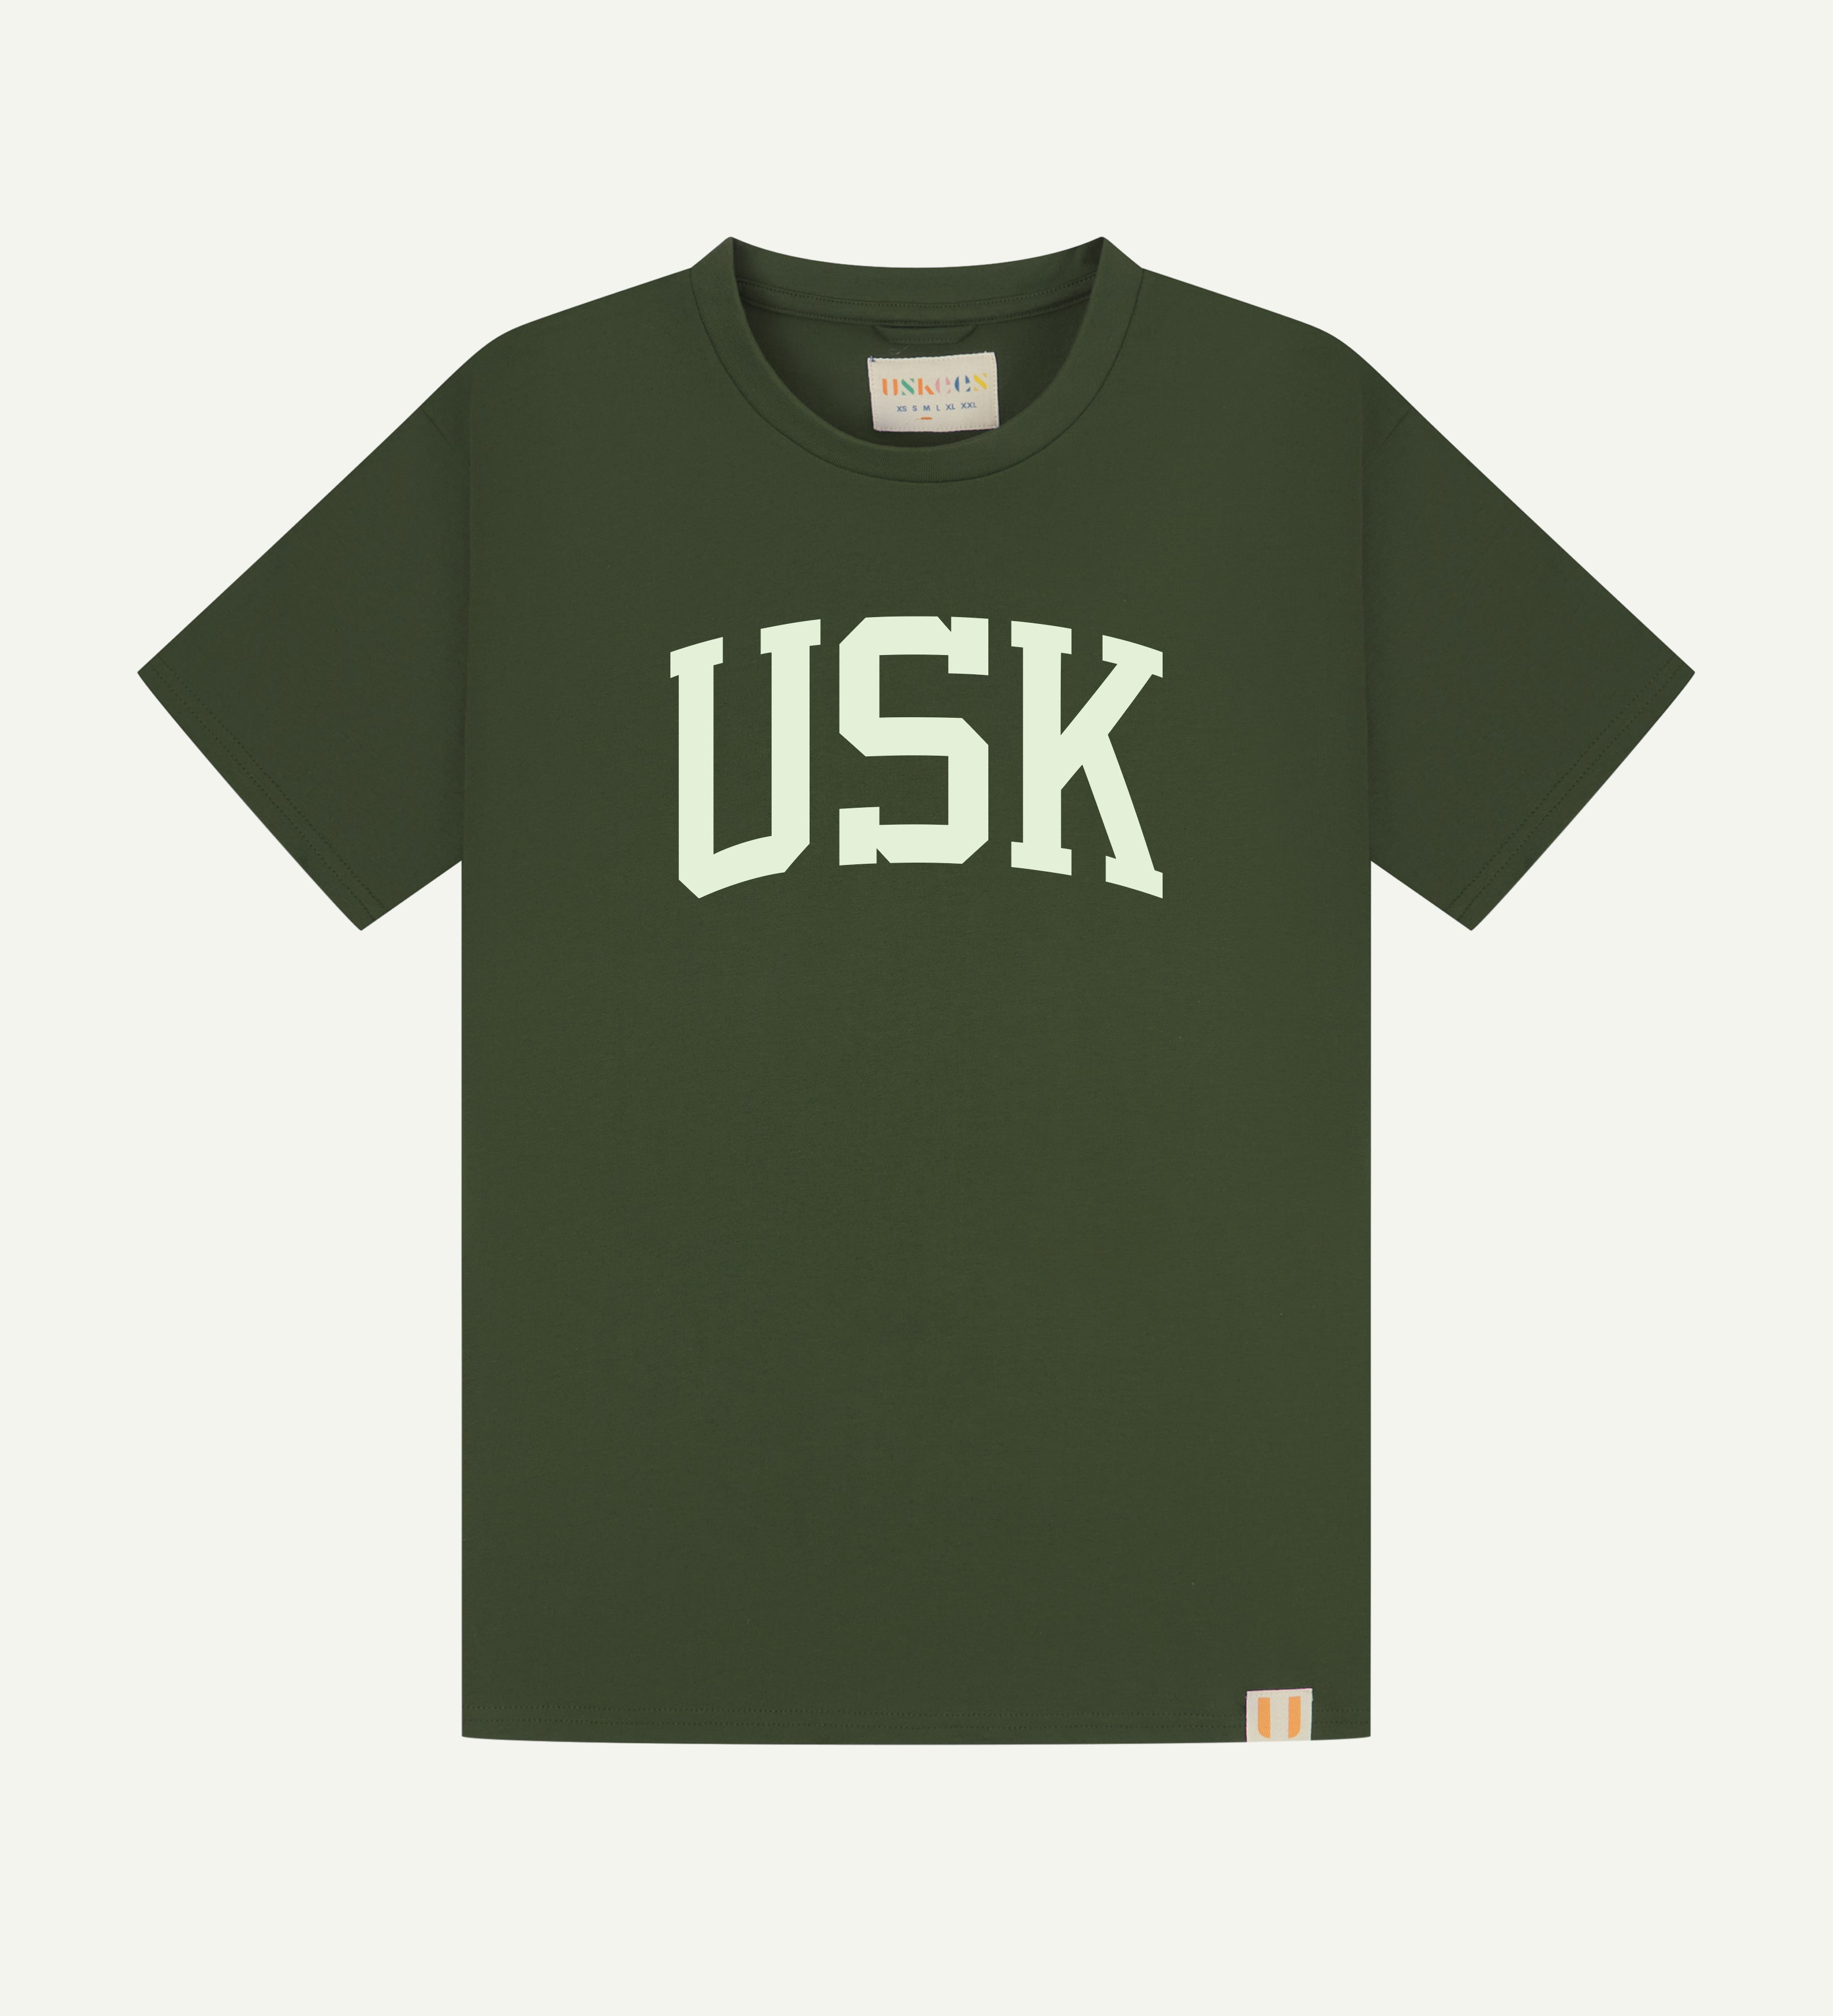 Flat shot of uskees men's signature tee in green with white USK logo on the front.